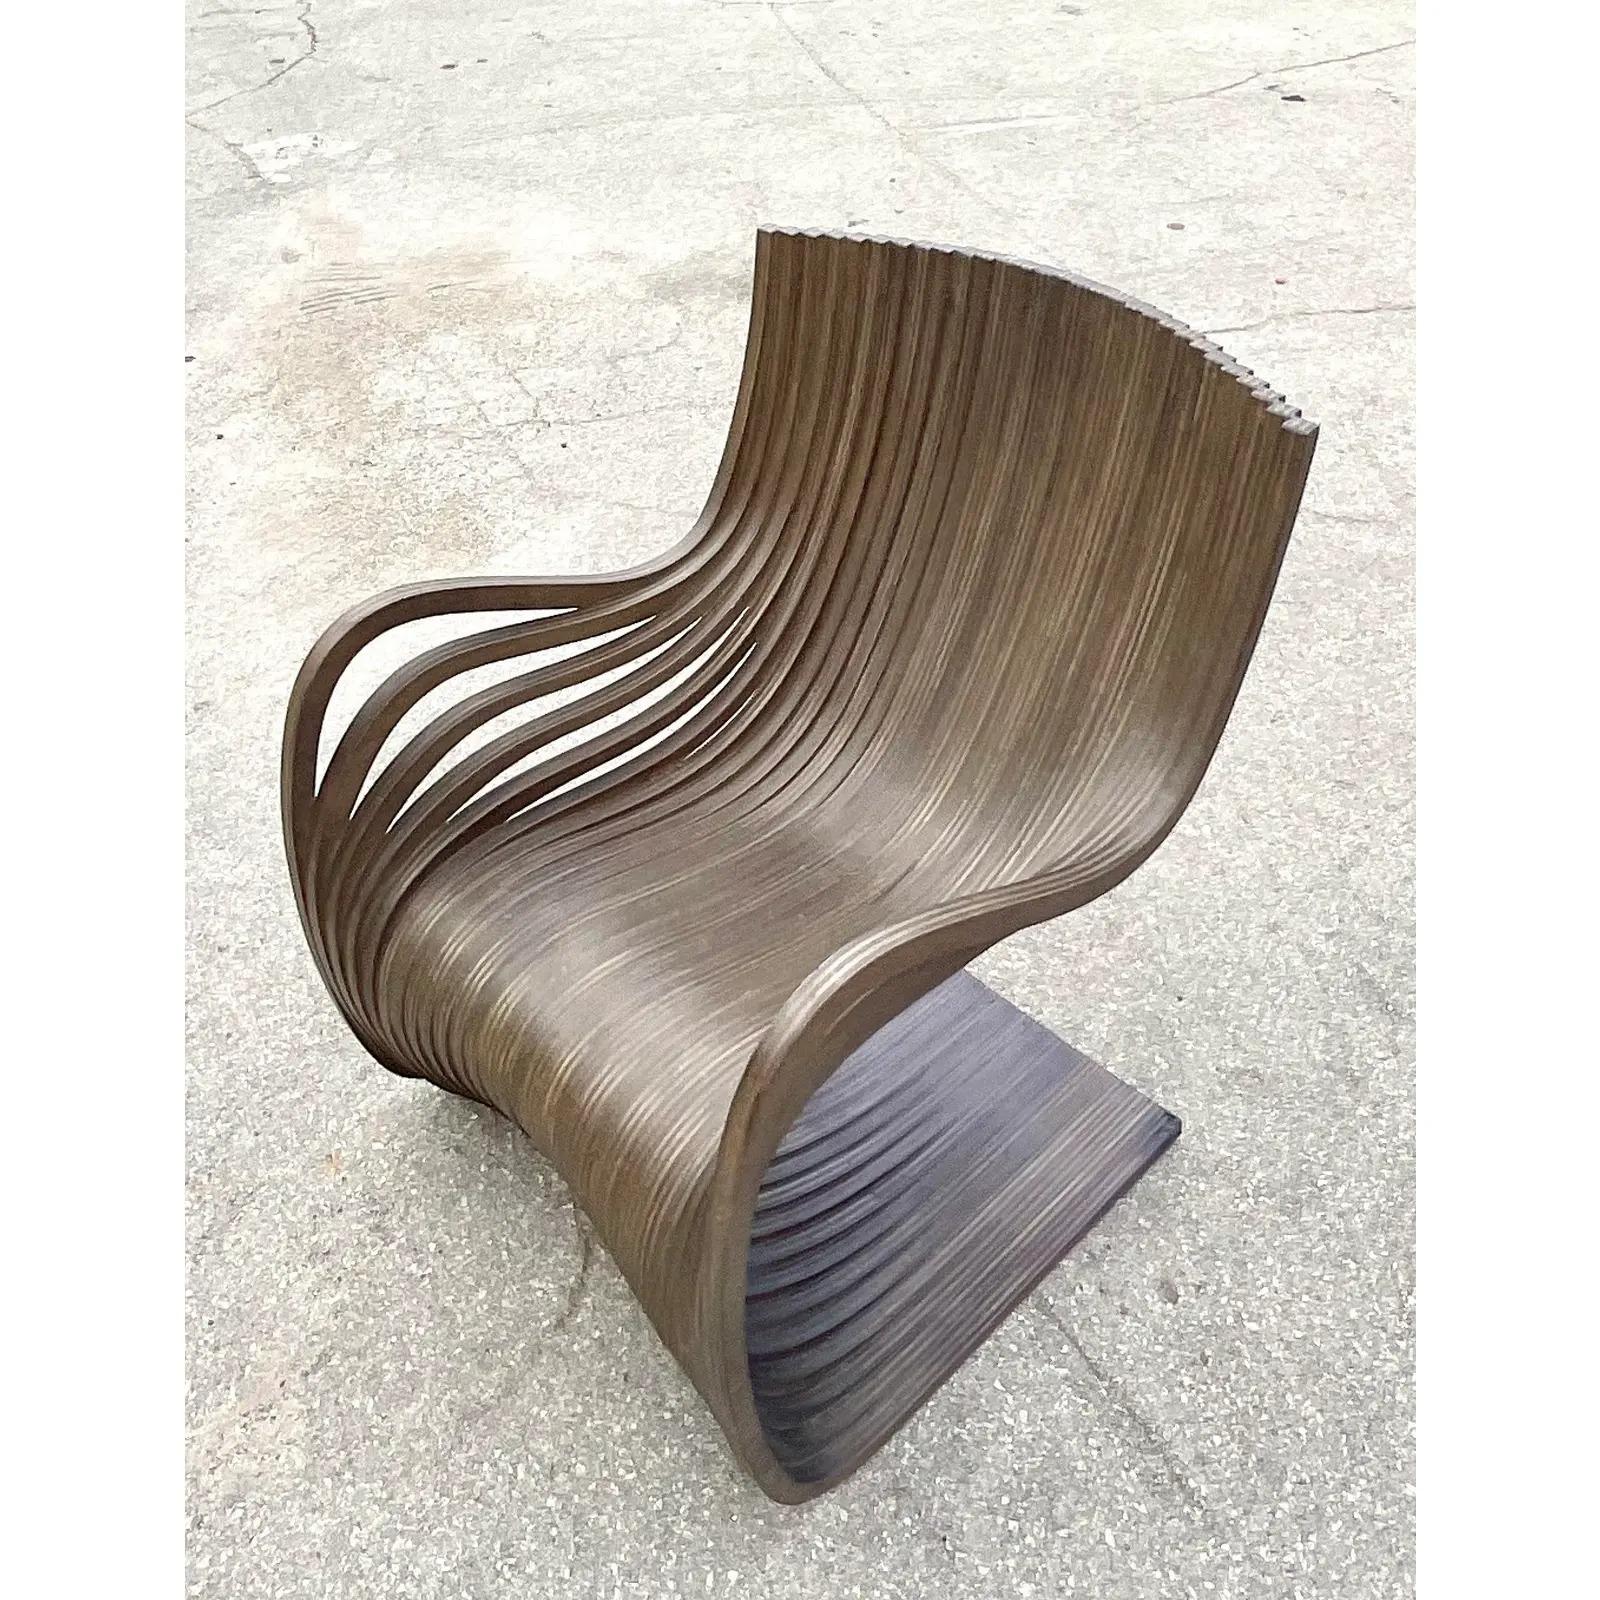 Incredible vintage Italian Contemporary lounge chair. Made by the iconic Piegatto Pipo. Beautiful Wenge wood construction in a beautiful wave design. Acquired from a Palm Beach estate.